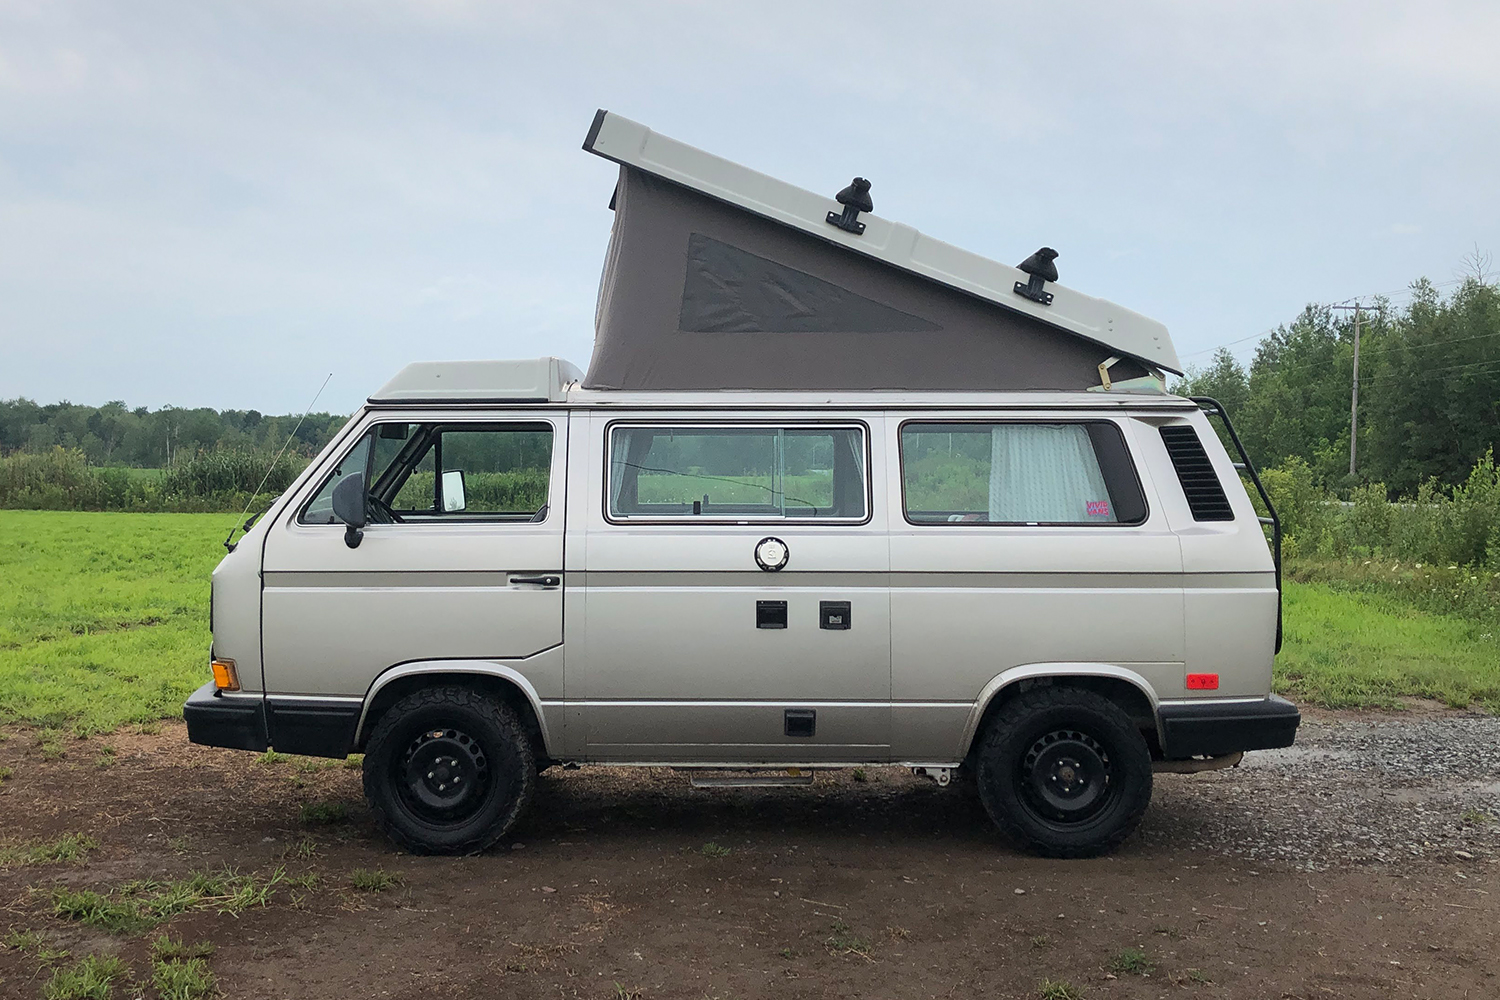 My 1990 Volkswagen Vanagon Westfalia camper van. Here's what you need to know before buying one yourself.